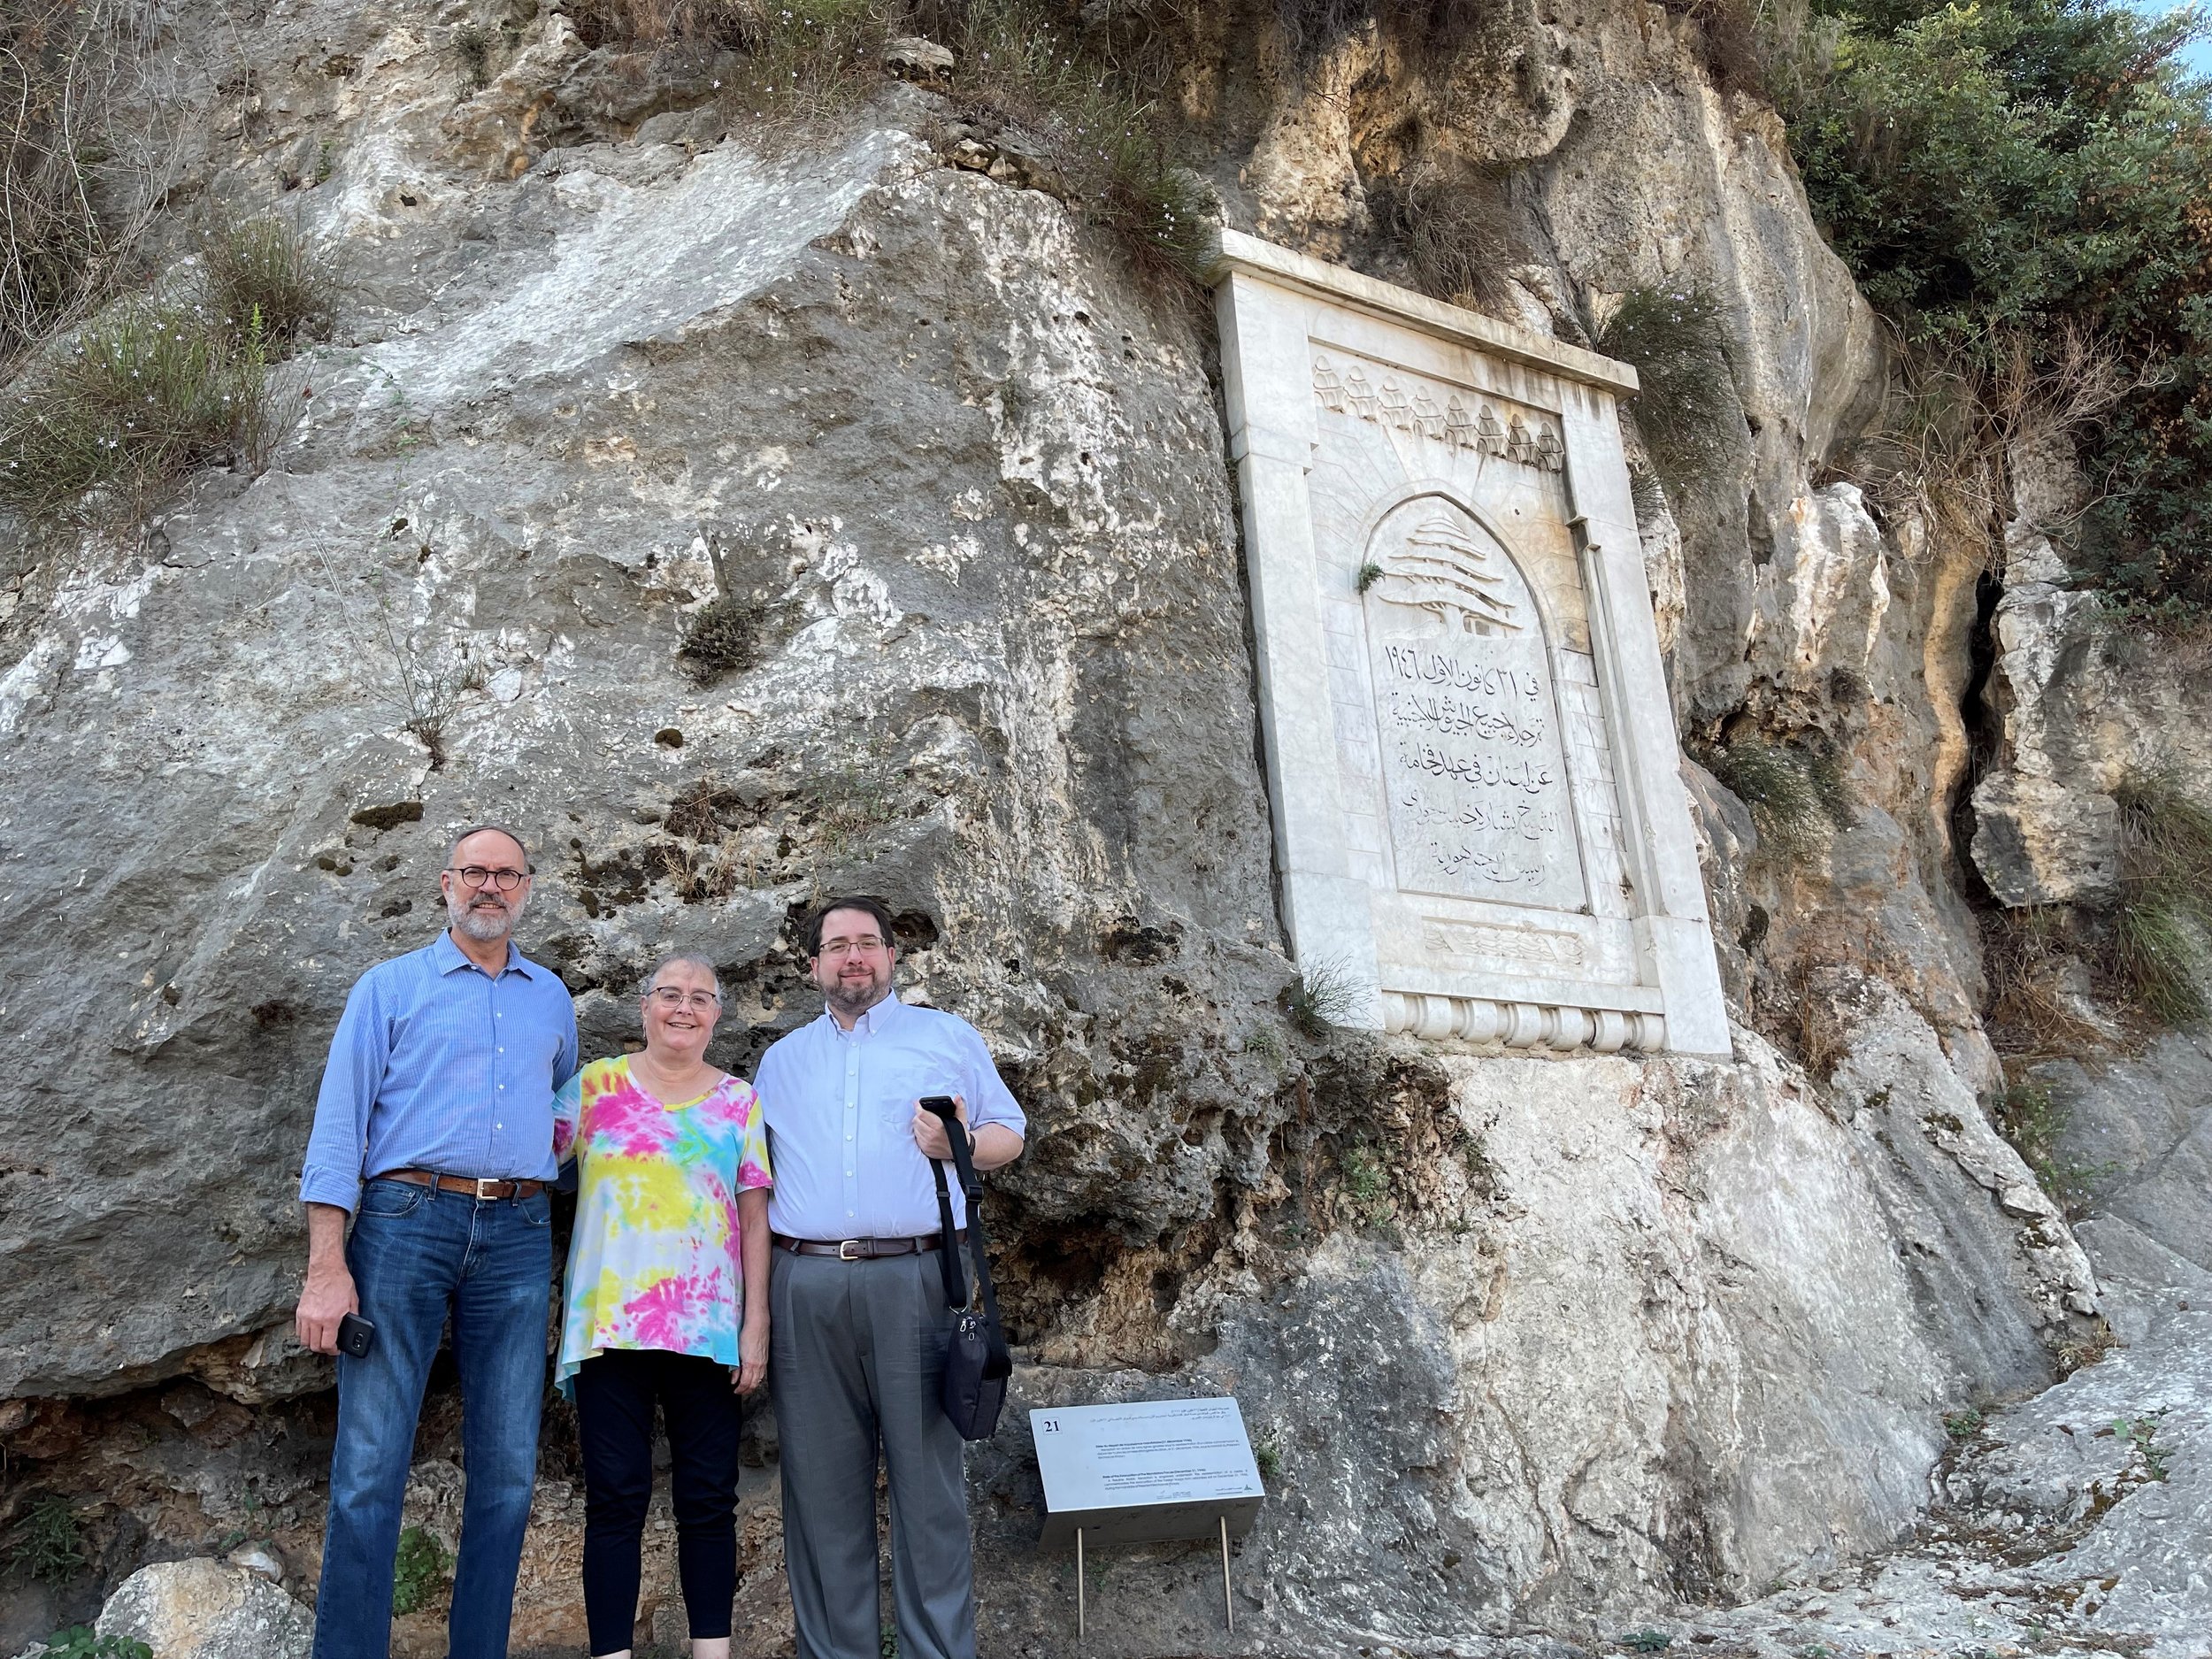  Steve and Julie Burgess and Tony Lorenz explore the historical stele (monument) along the Dog River   